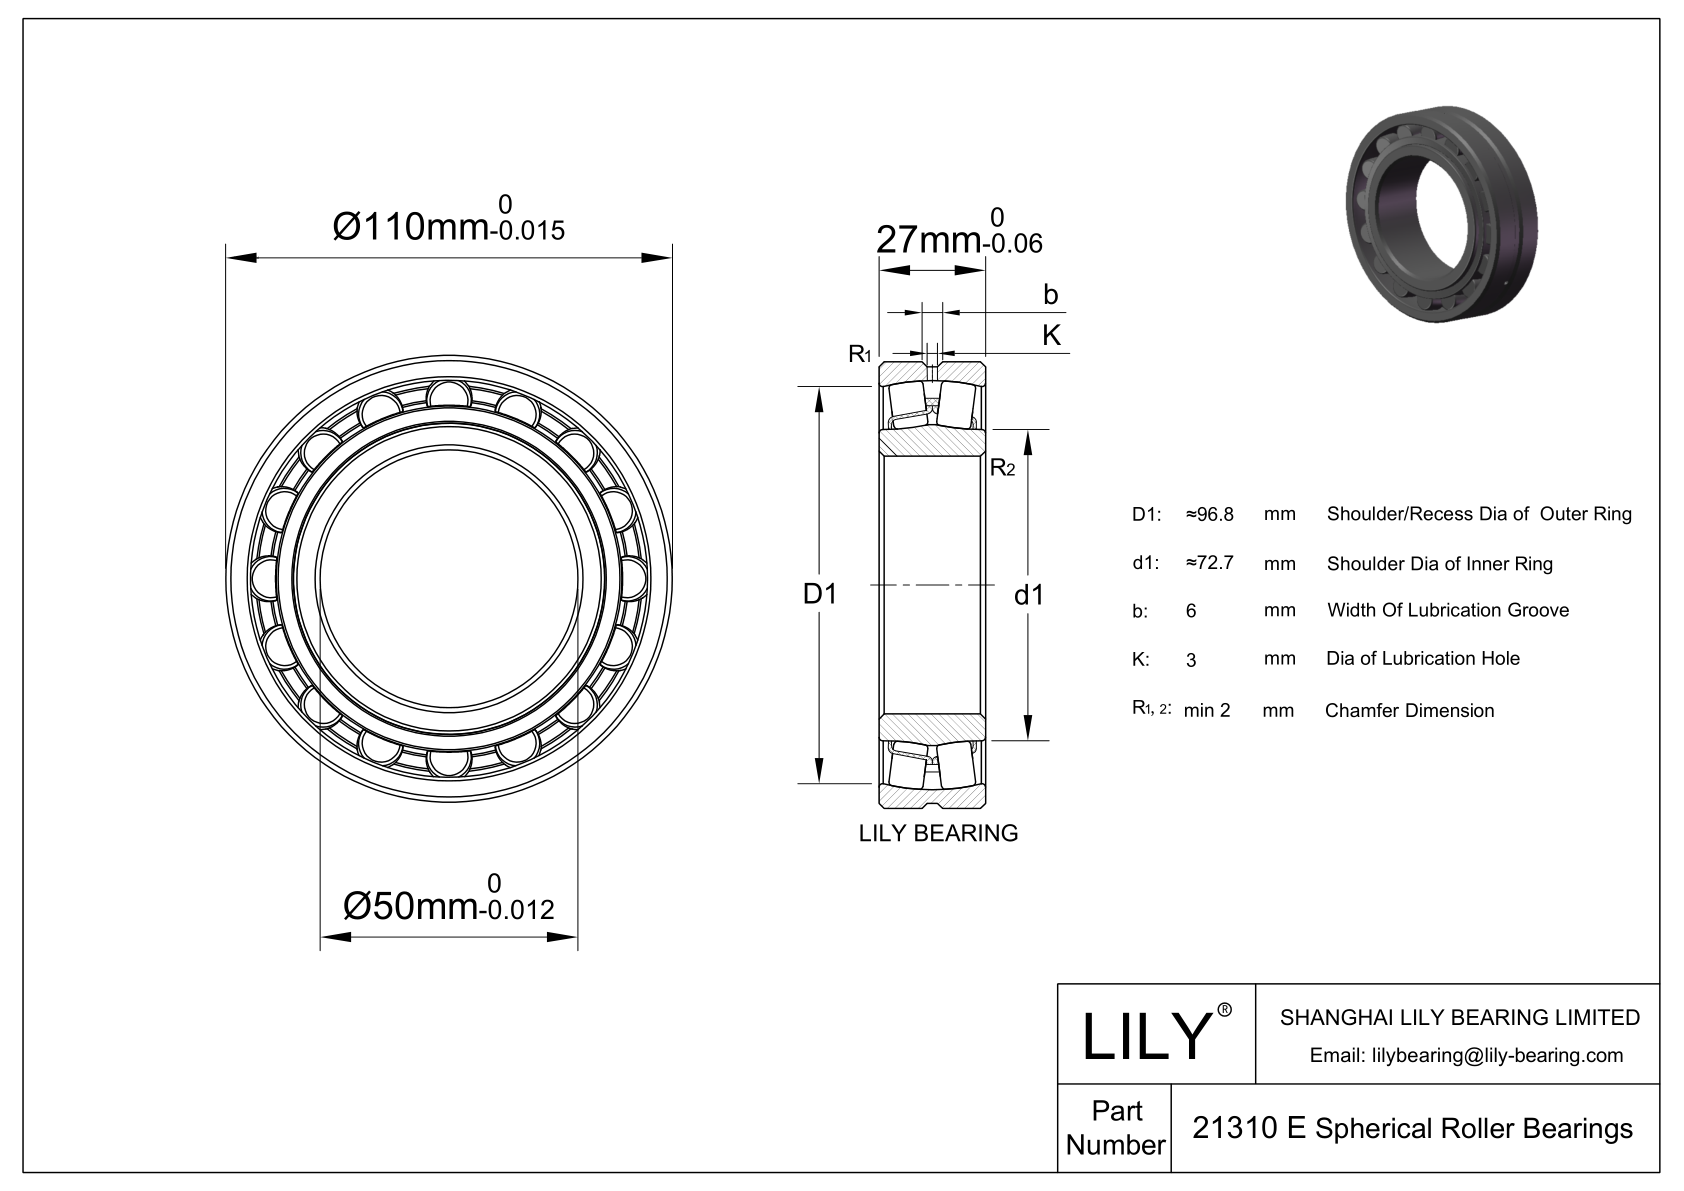 21310 E Double Row Spherical Roller Bearing cad drawing